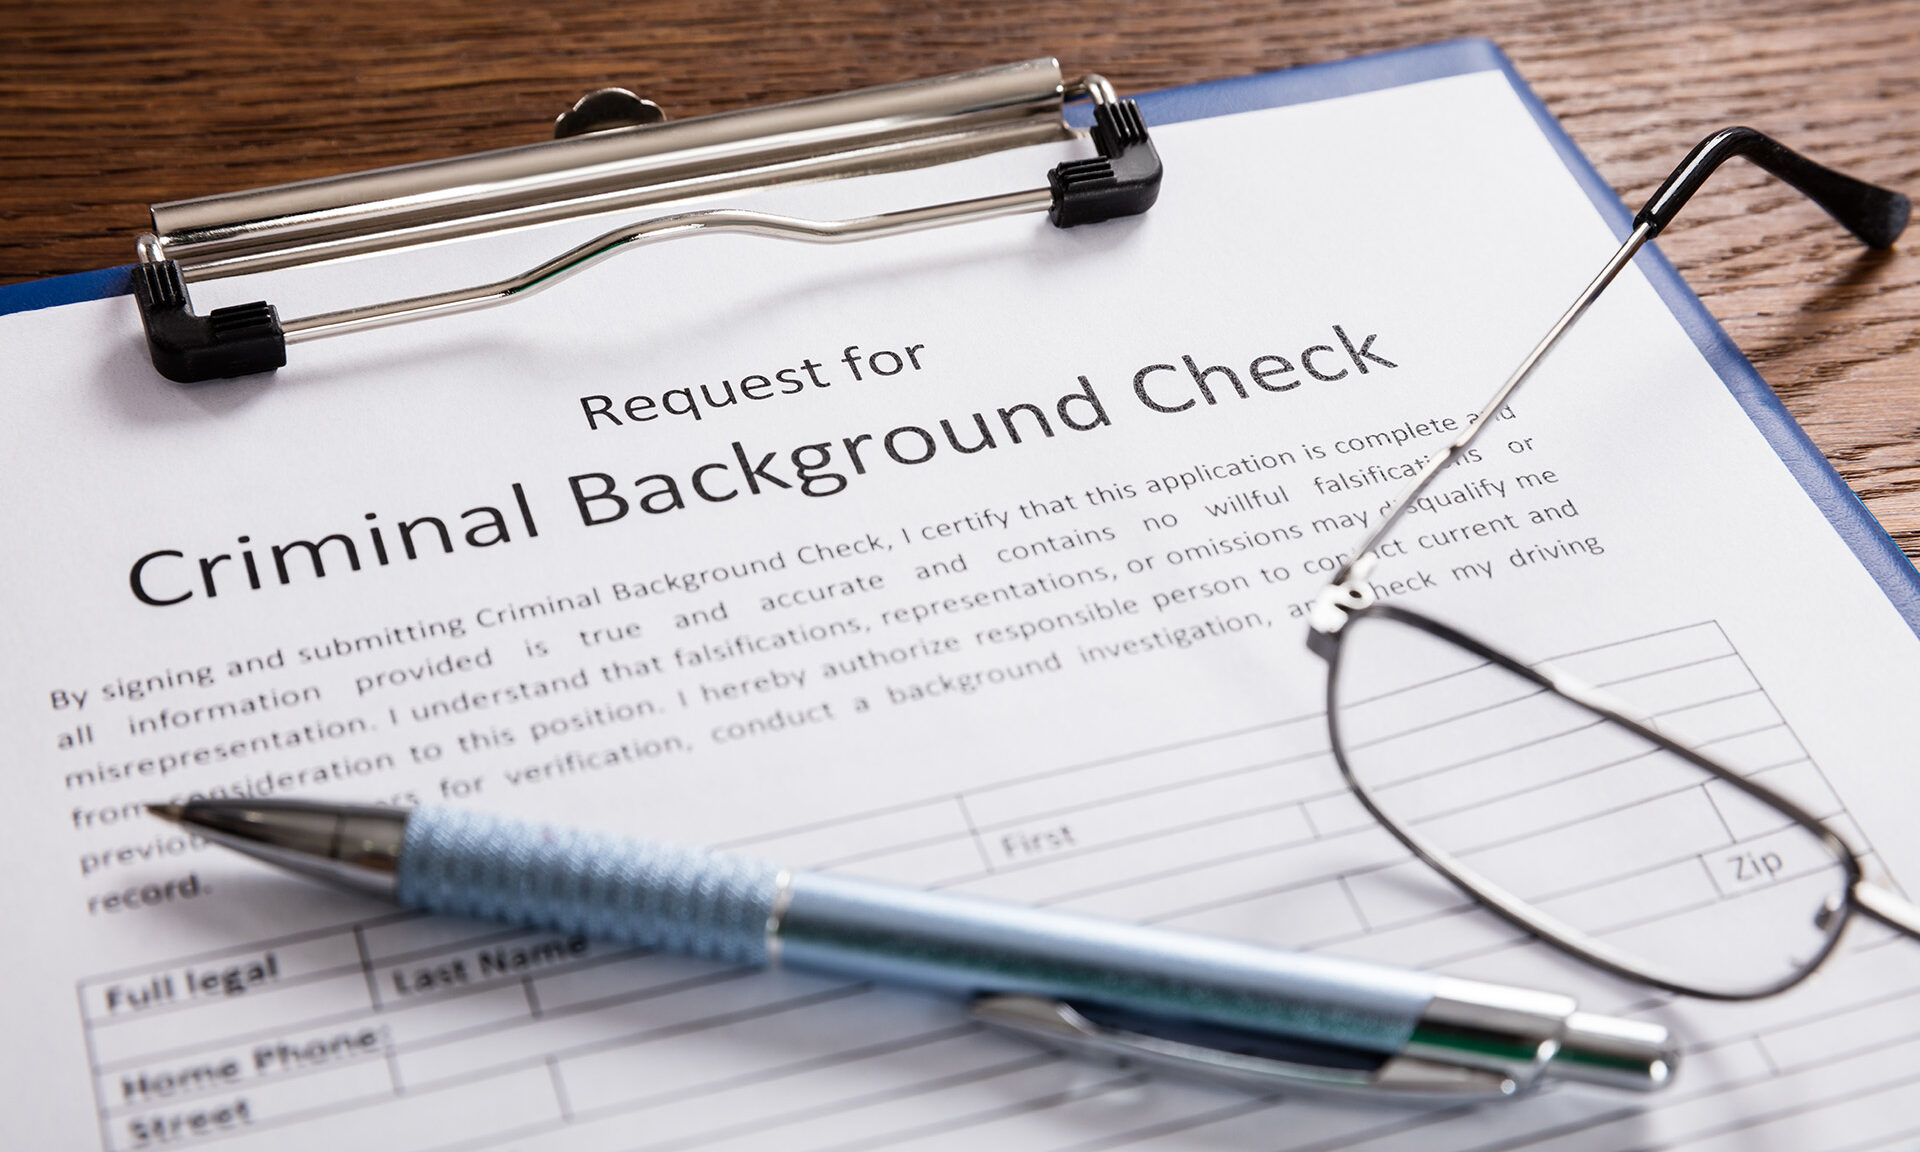 clipboard with page titled, "Criminal Background Check Request"